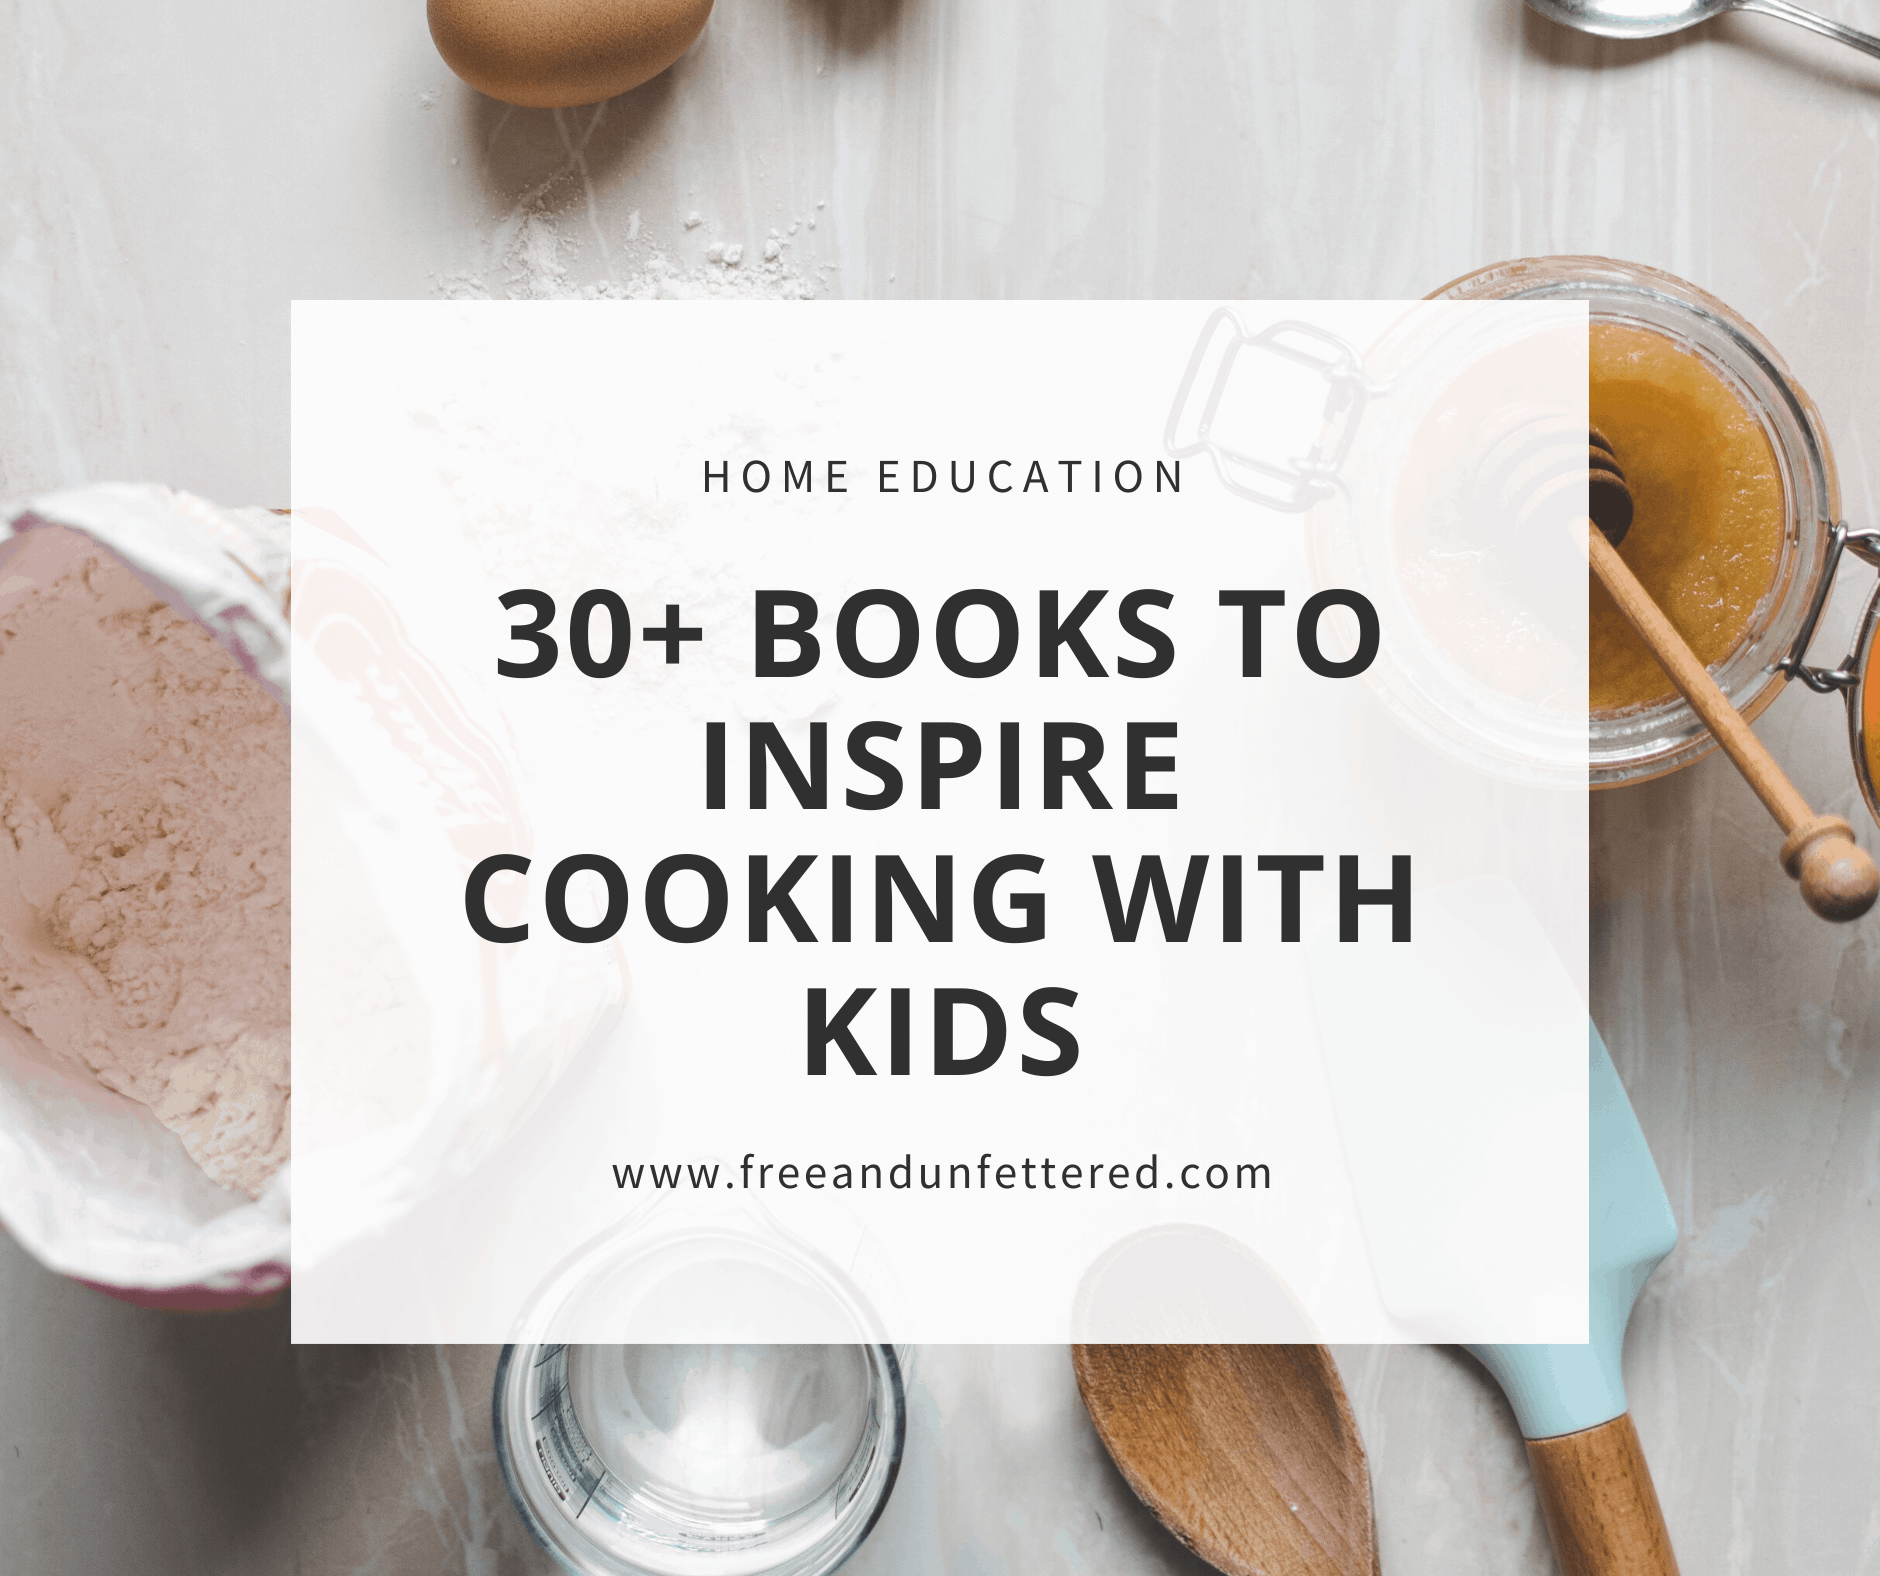 Do you enjoy cooking with your children? Or maybe you’d like to start but aren’t sure where to begin? Here are more than 30 fabulous children’s books that are sure to inspire you and your children to prepare a delicious meal together! #foodpreparation #kidsinthekitchen #childrensbooks #montessori #montessoriathome #practicallife #cookingwithkids